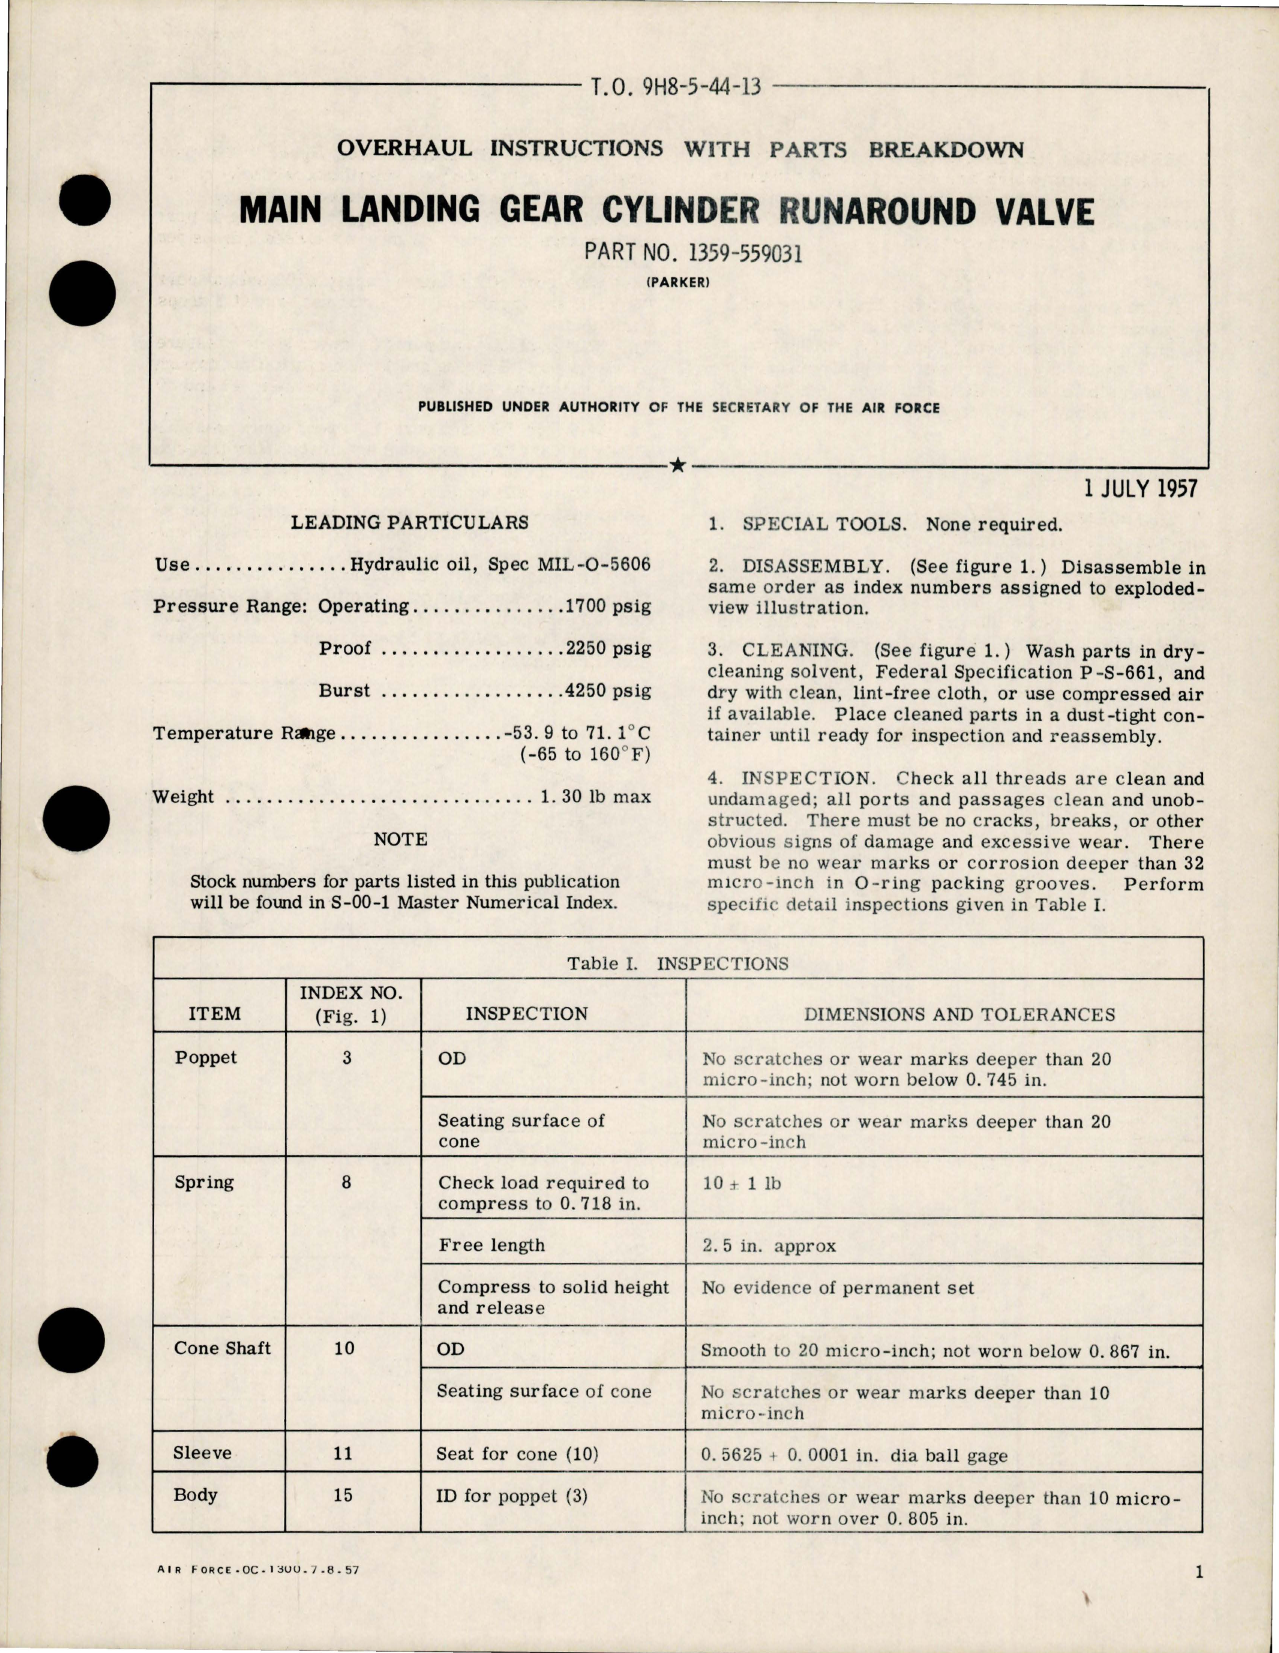 Sample page 1 from AirCorps Library document: Overhaul Instructions with Parts for Main Landing Gear Cylinder Runaround Valve - Part 1359-559031